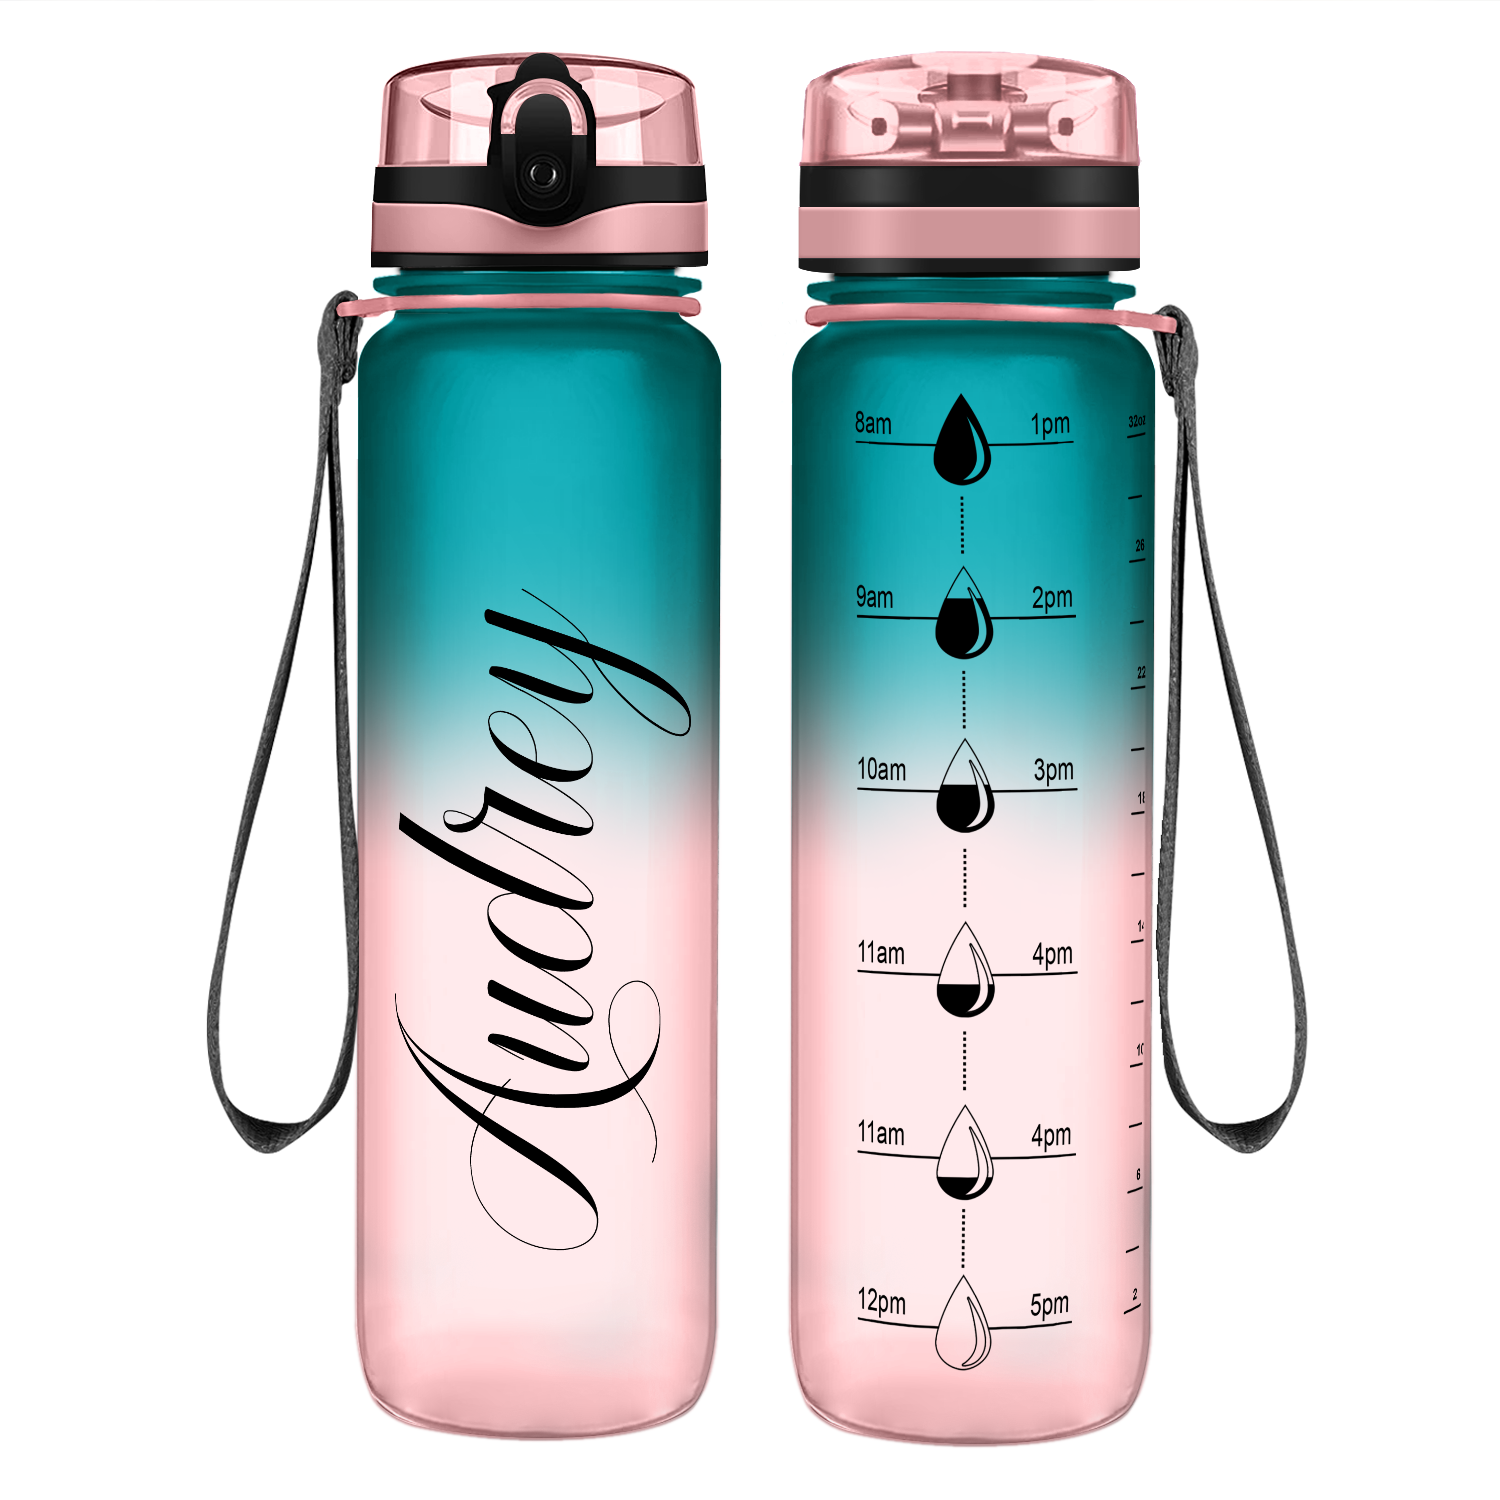 Personalized Water Bottles with Vinyl Decals 😍 